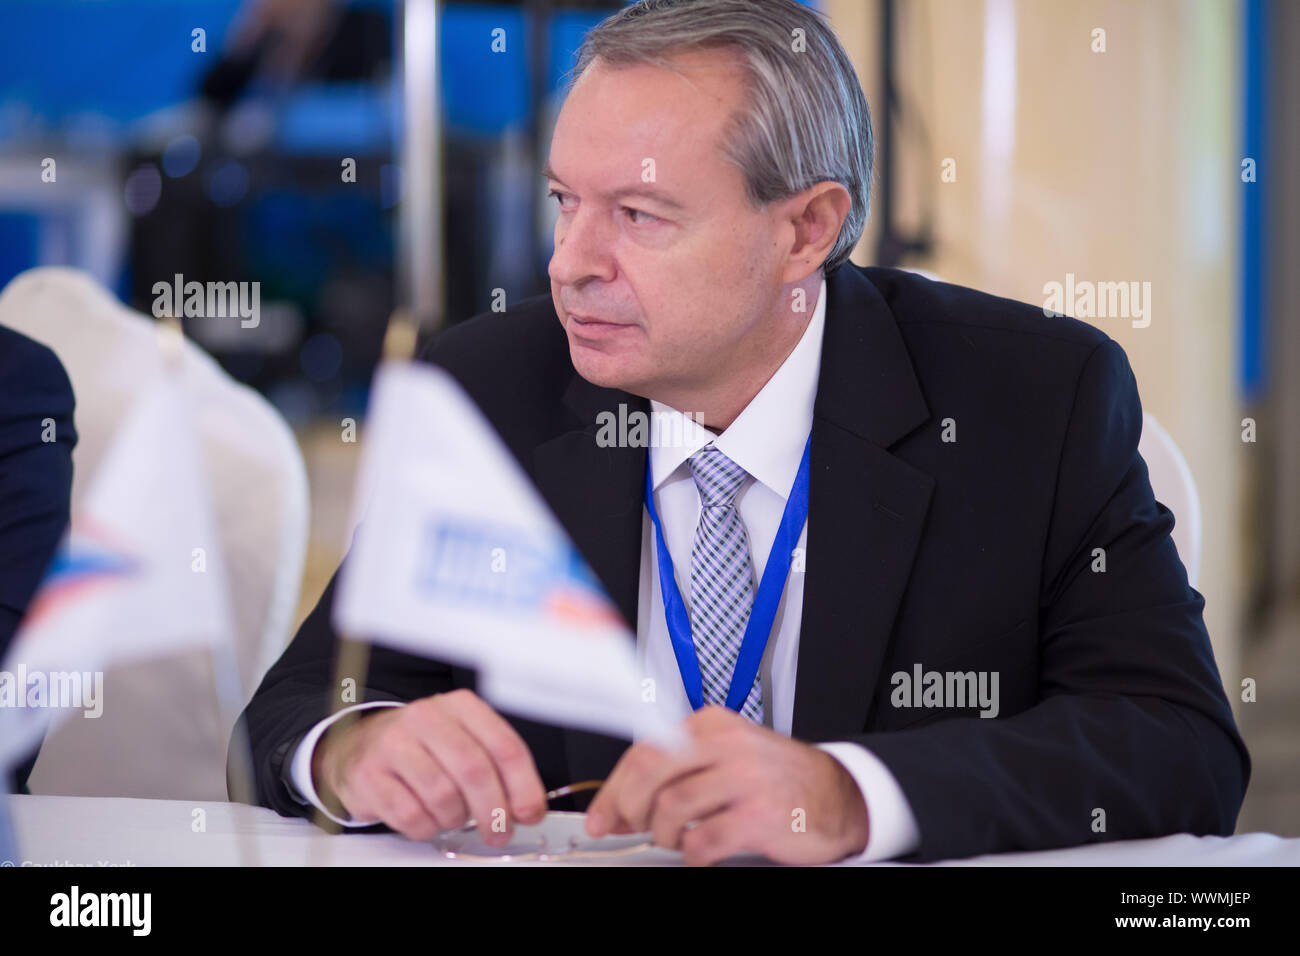 ALMATY, KAZAKHSTAN - OCTOBER 29,2014: International Scientific and Practical Conference "Standardization and Technical Regulations in the New Environm Stock Photo